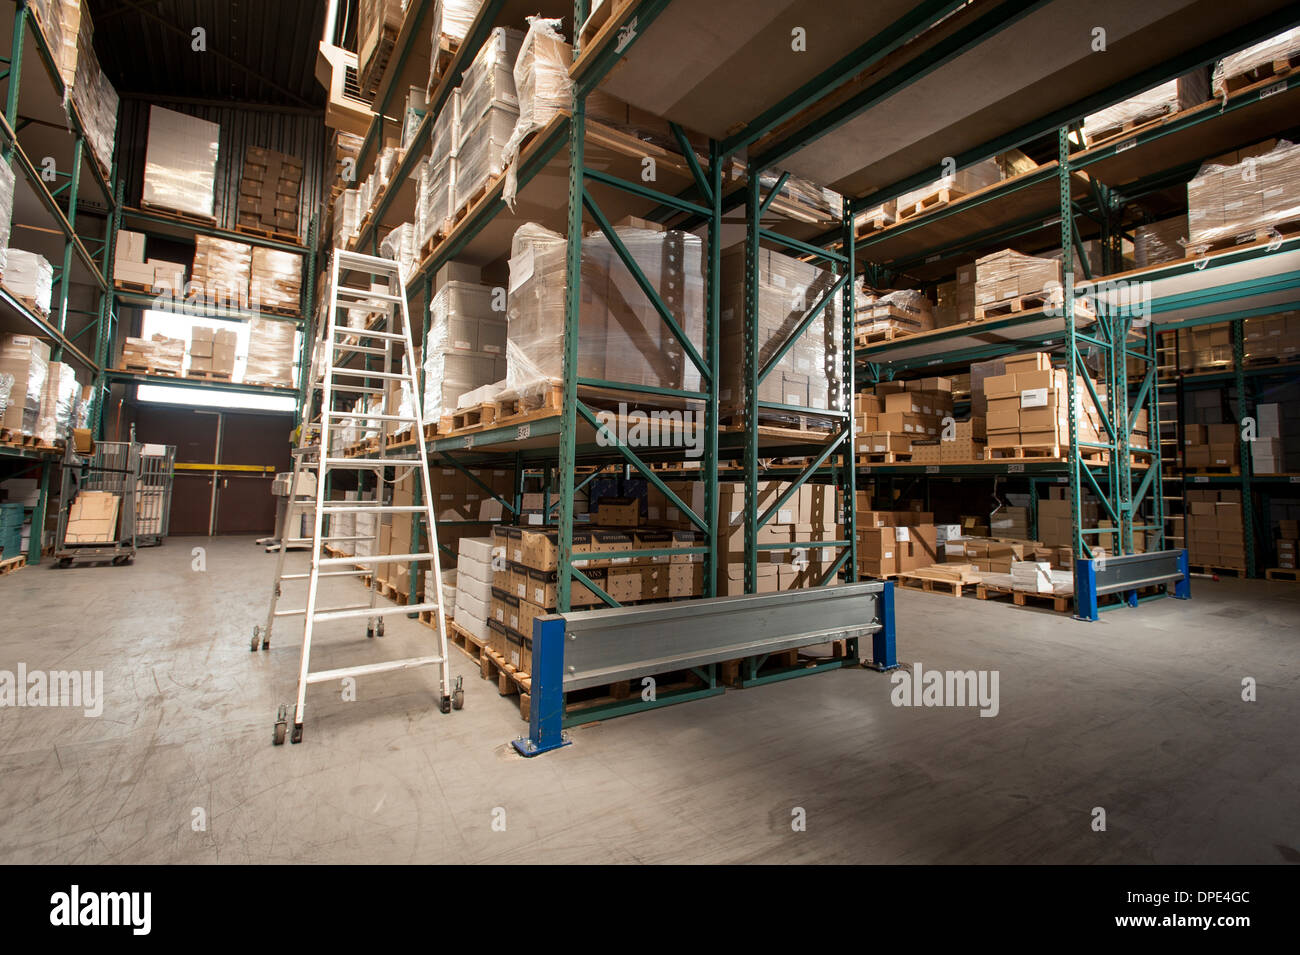 Shelves of stock and orders in printing warehouse Stock Photo